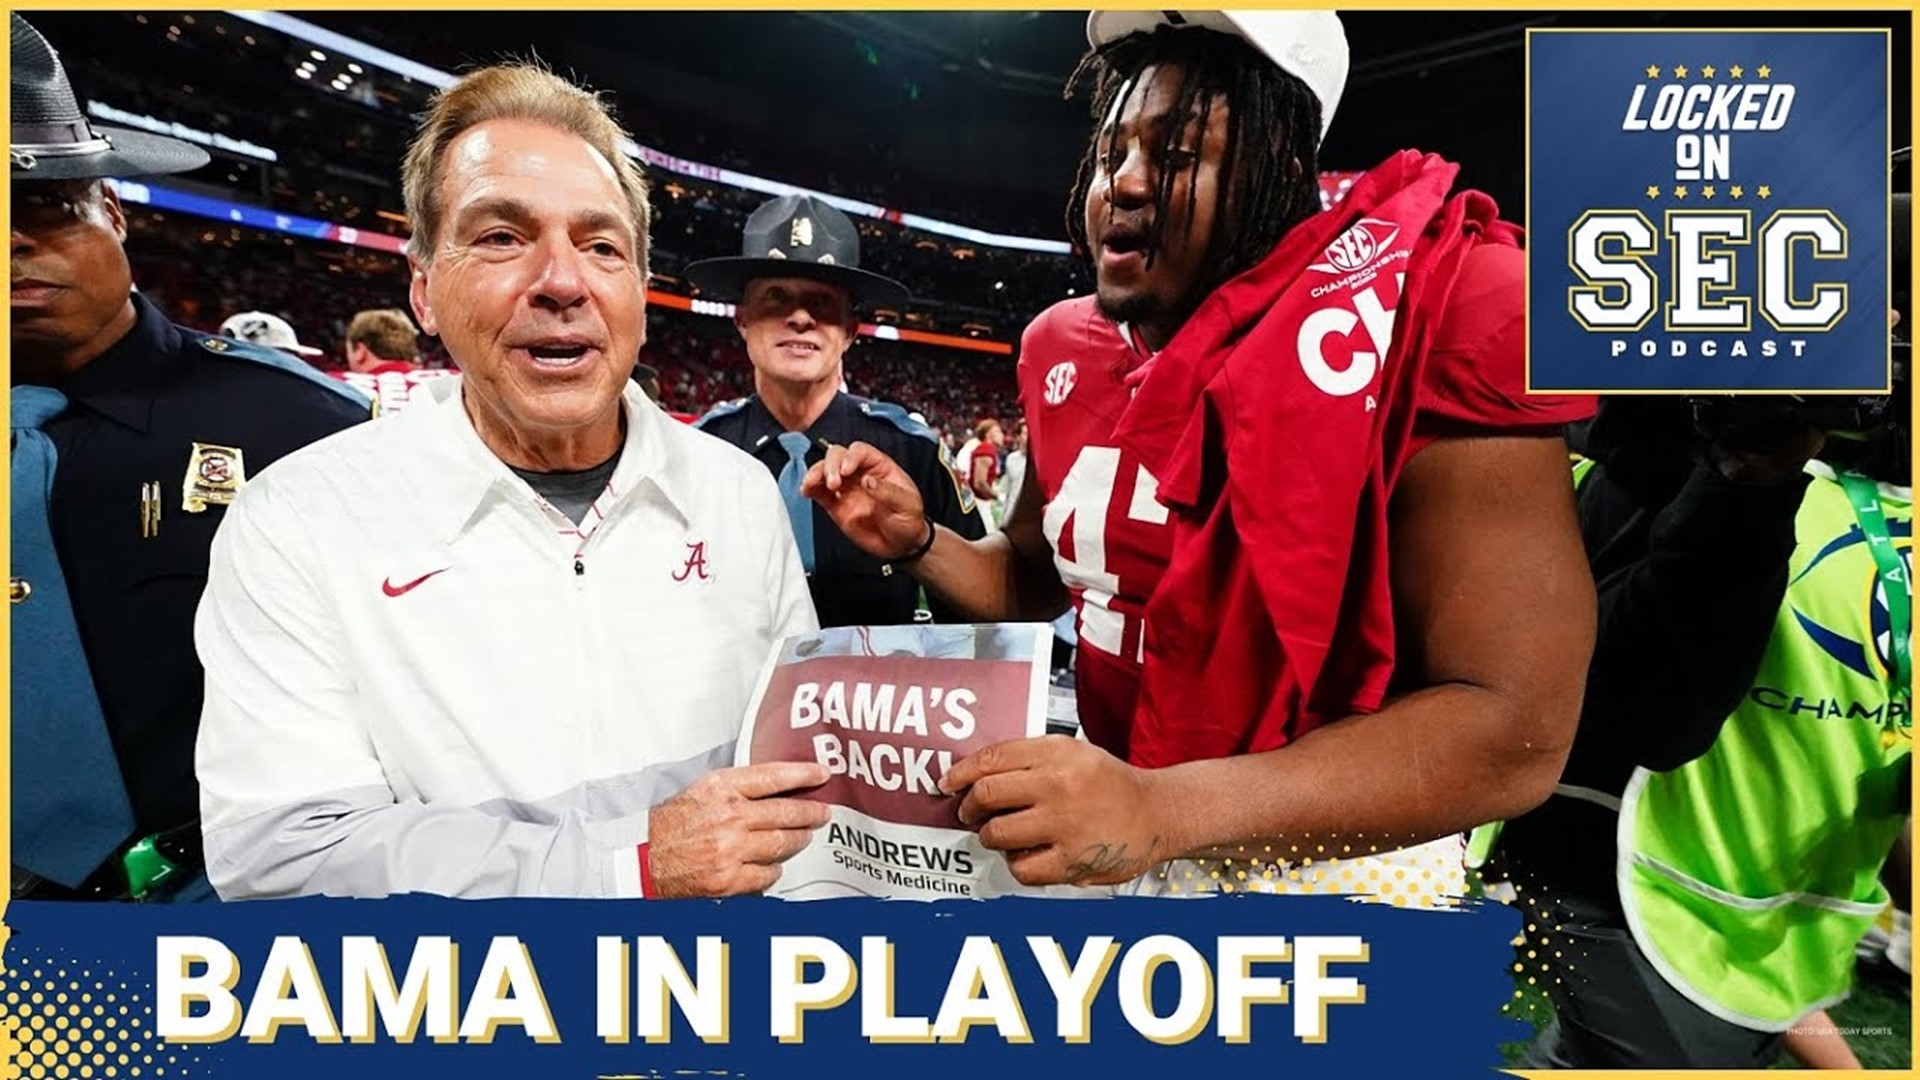 College Football Playoff will feature Michigan v. Alabama and